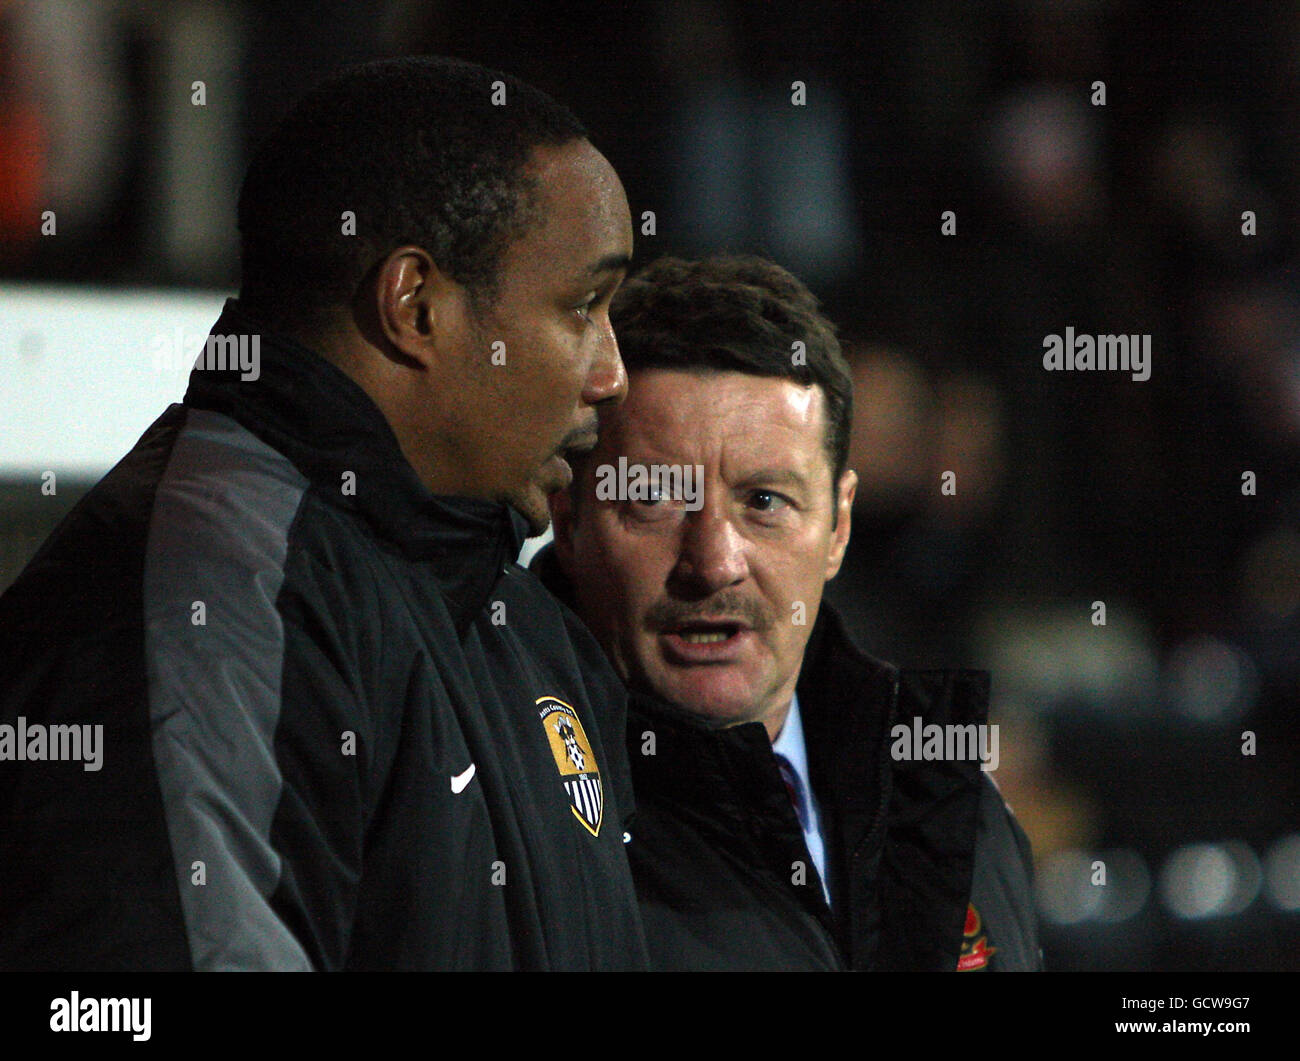 Notts County manager Paul Ince (left) and Swindon Town manager Danny Wilson in conversation on the touchline during the npower Football League One match at Meadow Lane, Nottingham. Stock Photo